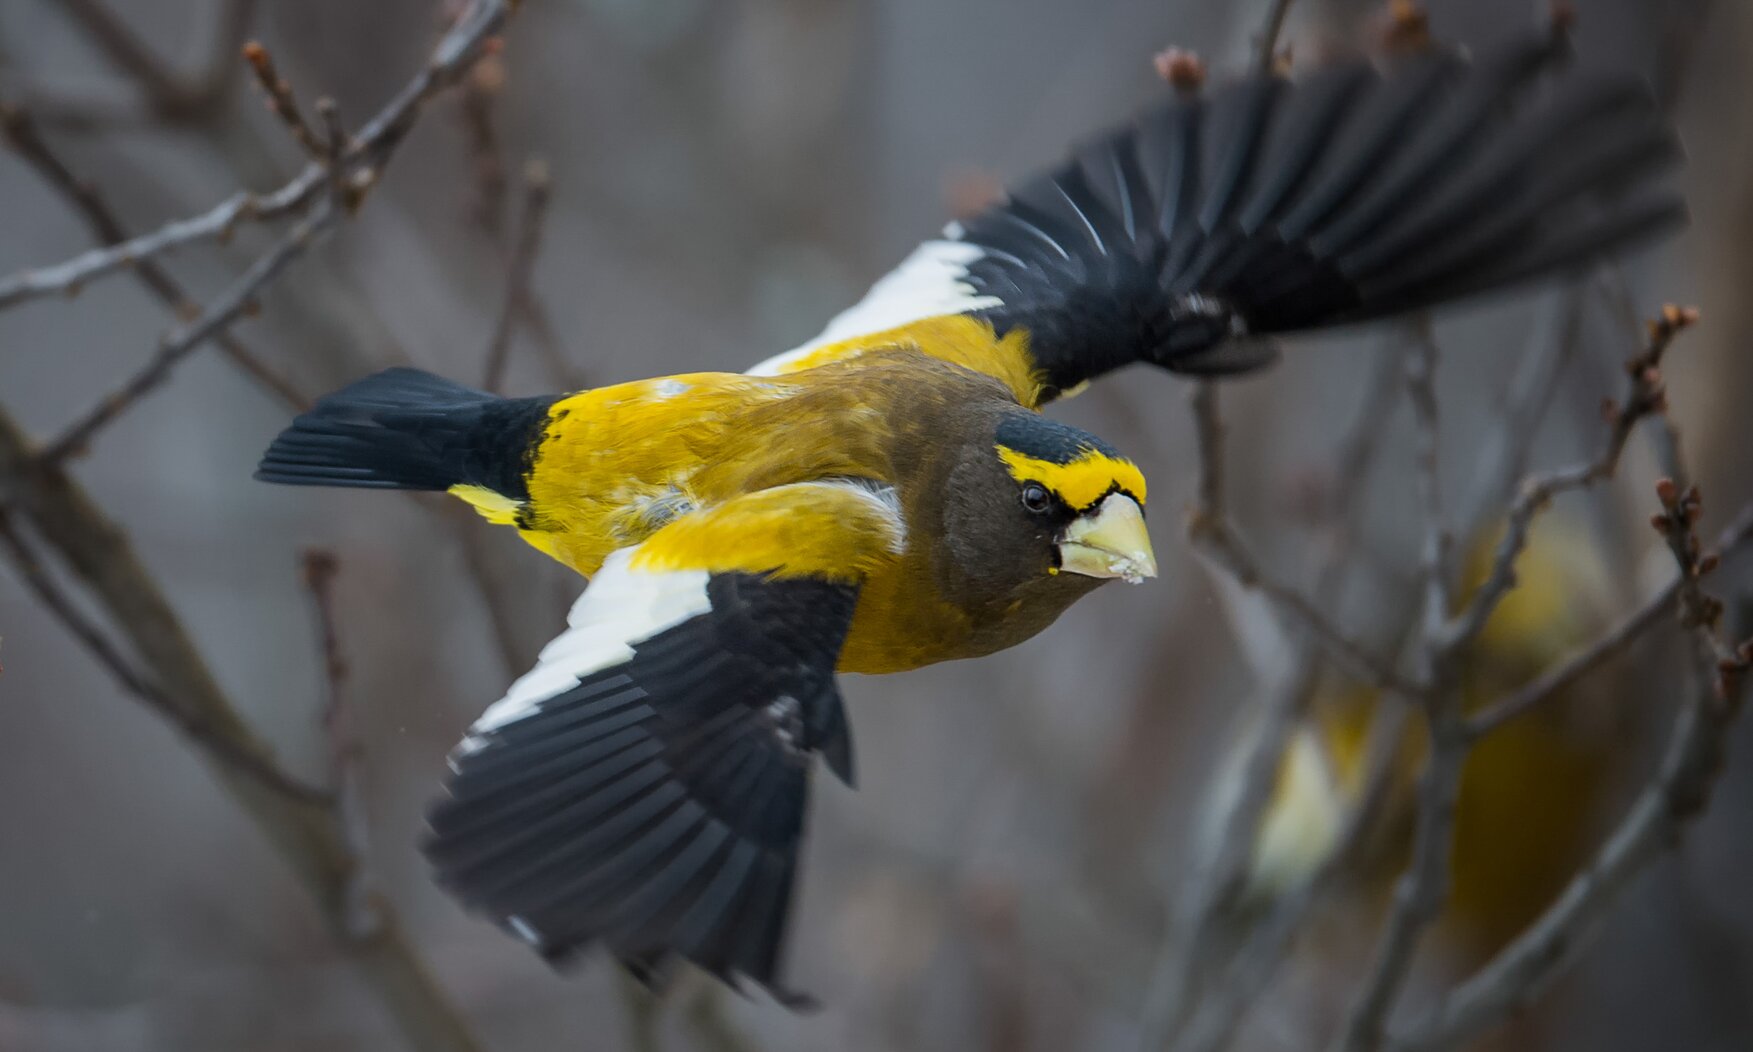 Christmas Bird Counters are always on the lookout for northern species like the Evening Grosbeak. Christmas Bird Count records of such species allow conservation scientists to document changes in their populations over time. Photo: Bea Binka